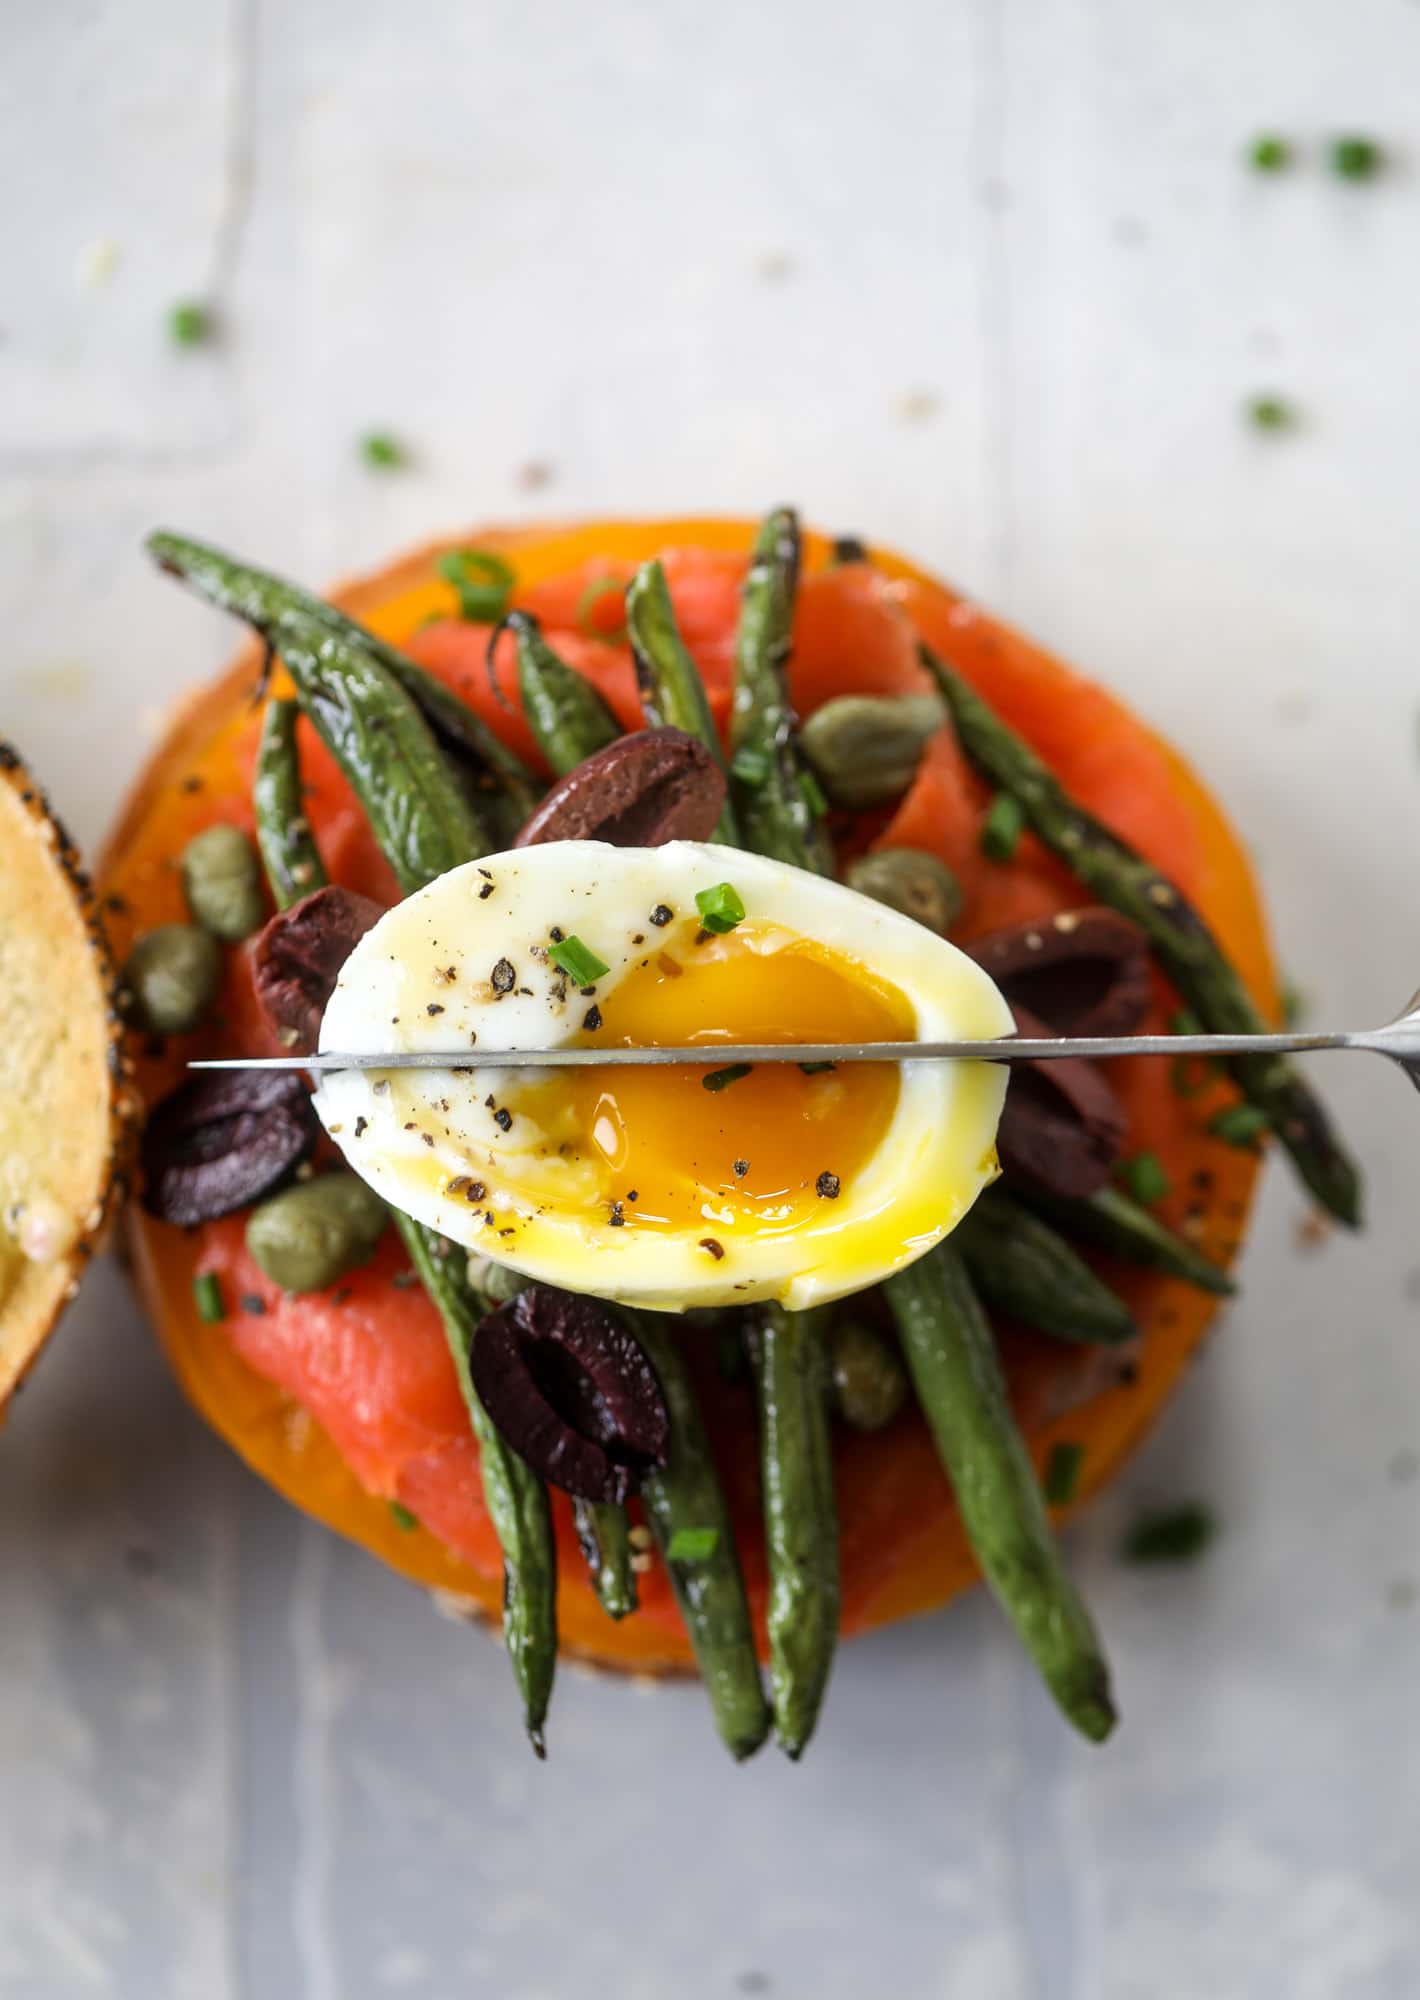 These nicoise bagels are a spin on my favorite salad! Loaded with smoked salmon, blistered green beans and tons of goodness. They are delish!